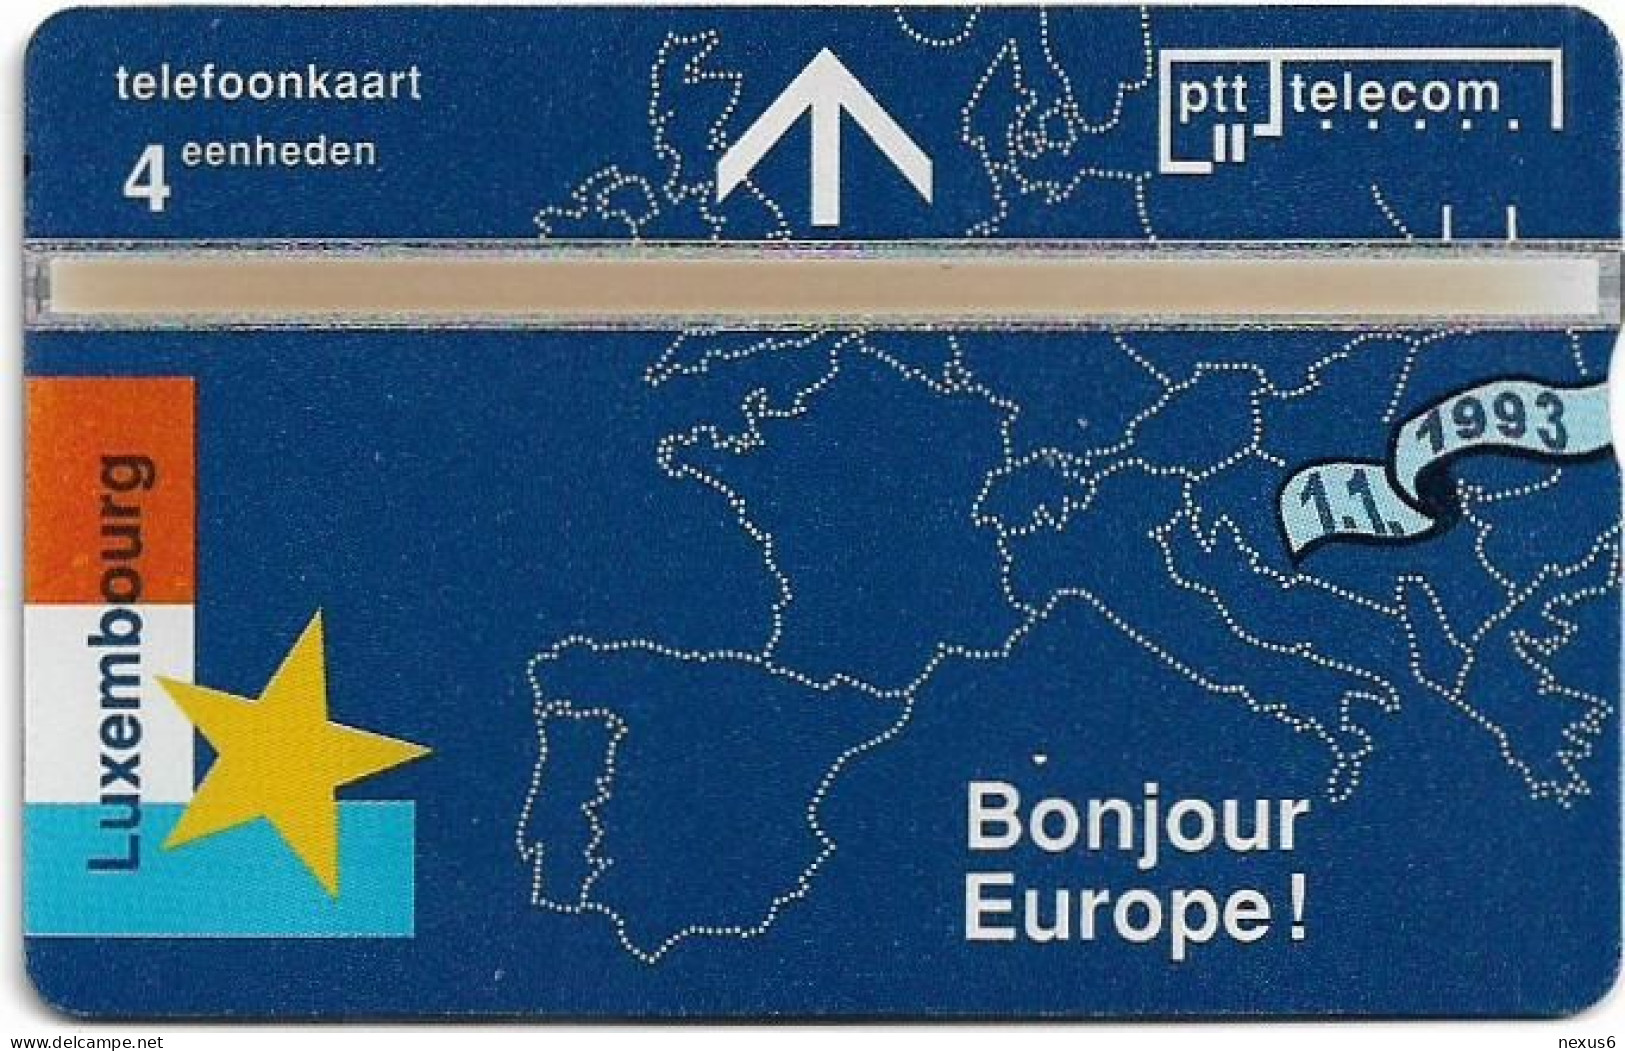 Netherlands - KPN - L&G - R040-12 - Luxembourg, Bonjour Europe! - 303L - 03.1993, 4Units, 5.000ex, Mint - Private